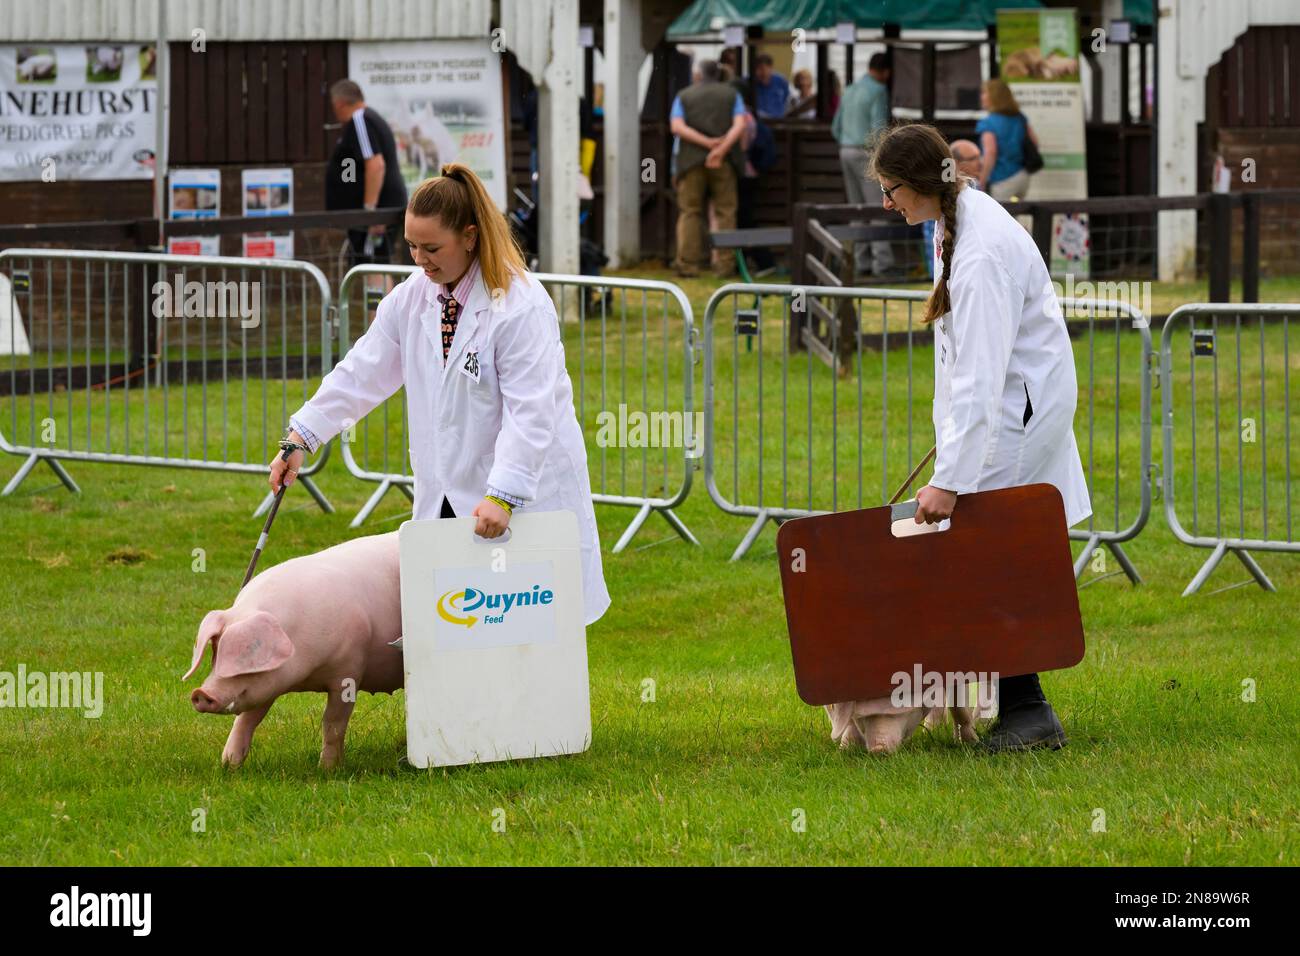 Pedigree Welsh pigs (sows, hogs) & female farmers (white coats) using sticks & boards walking - Great Yorkshire Show arena 2022, Harrogate England UK. Stock Photo